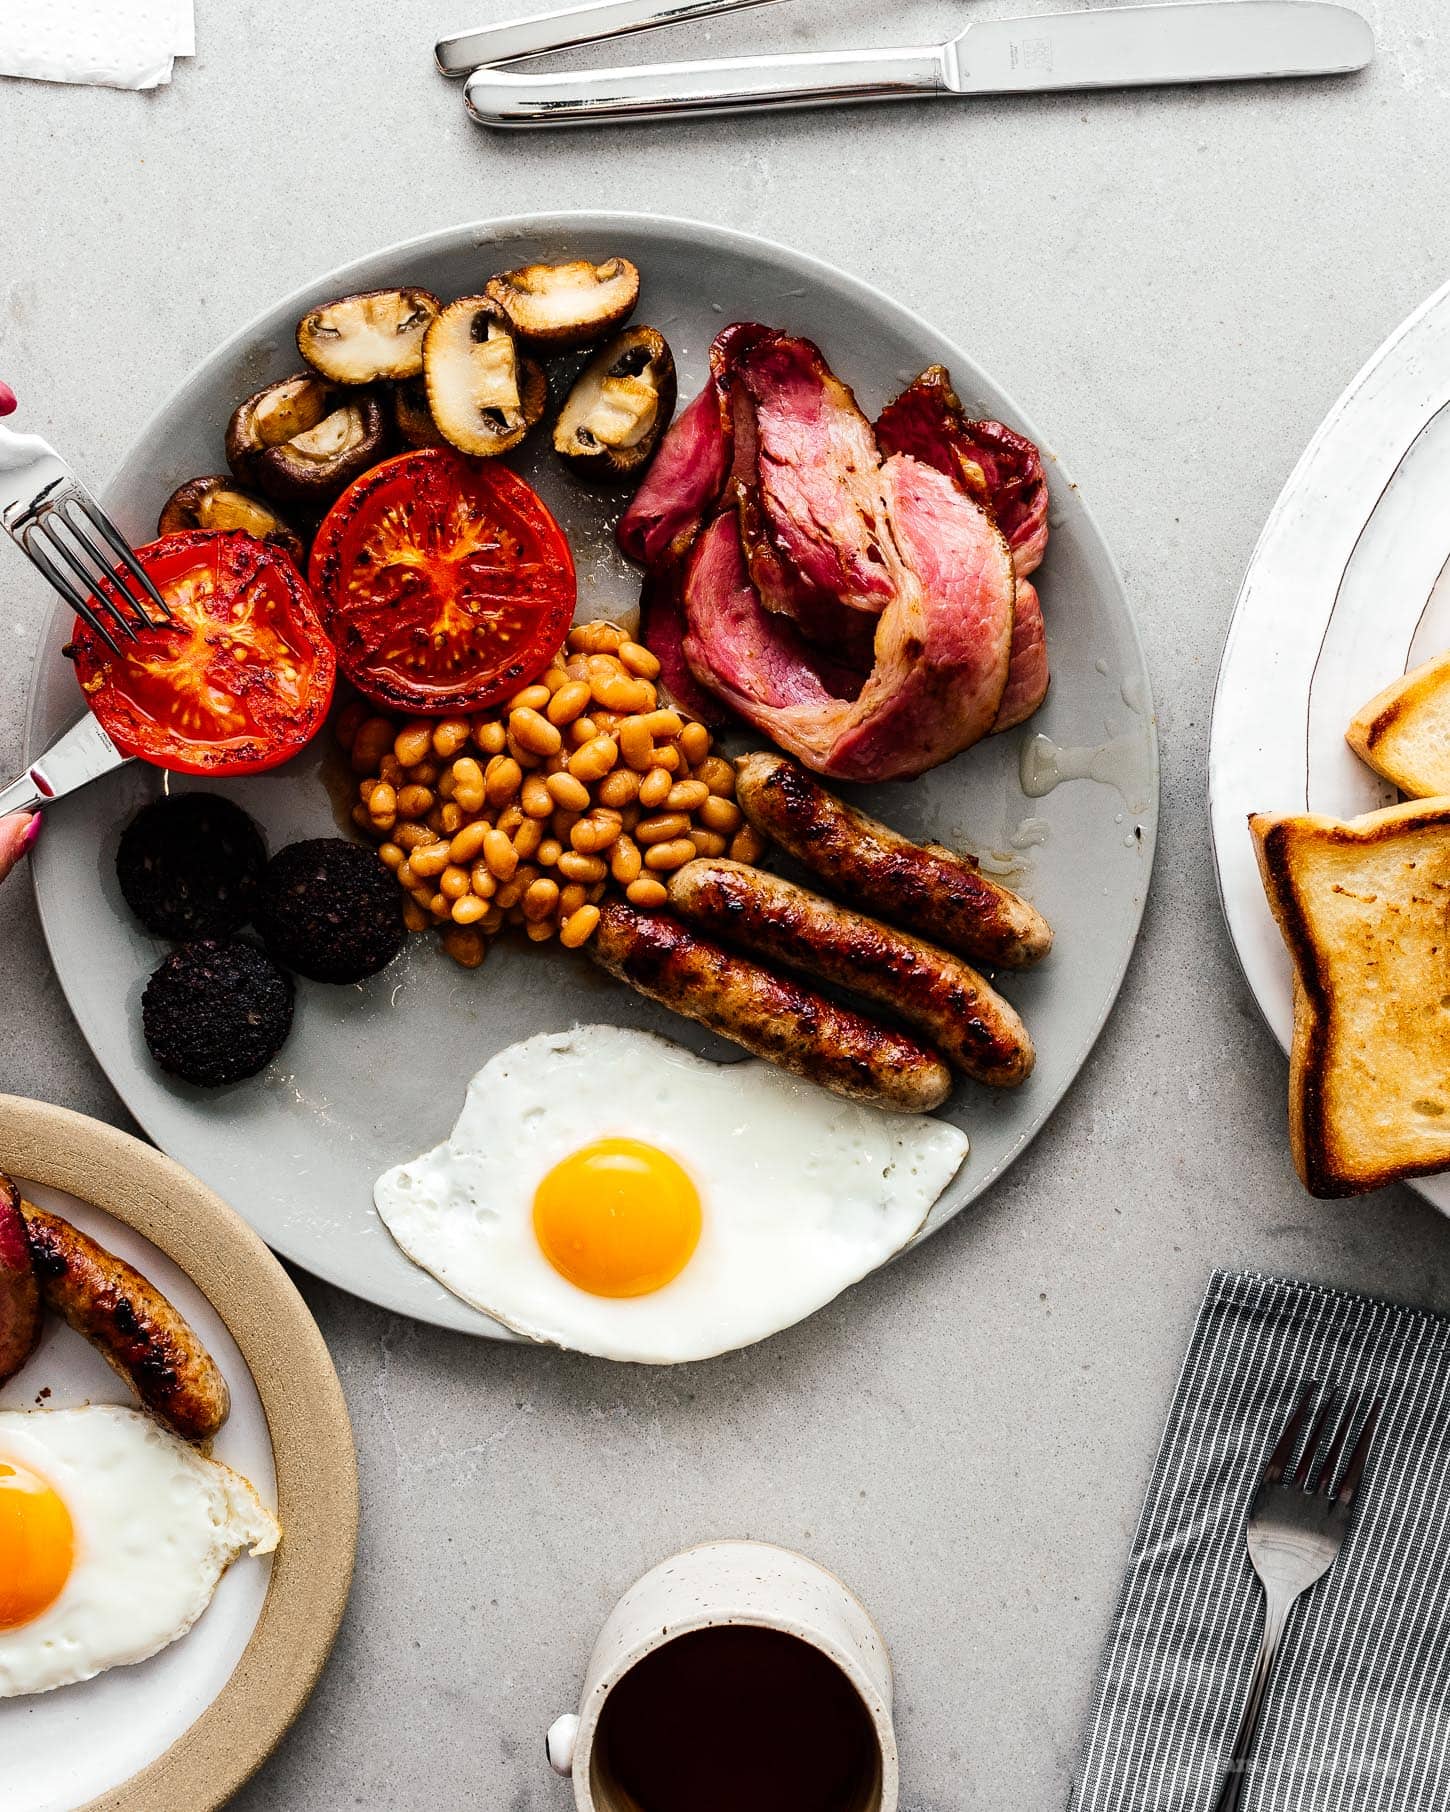 the-full-english-breakfast-could-die-with-the-next-generation